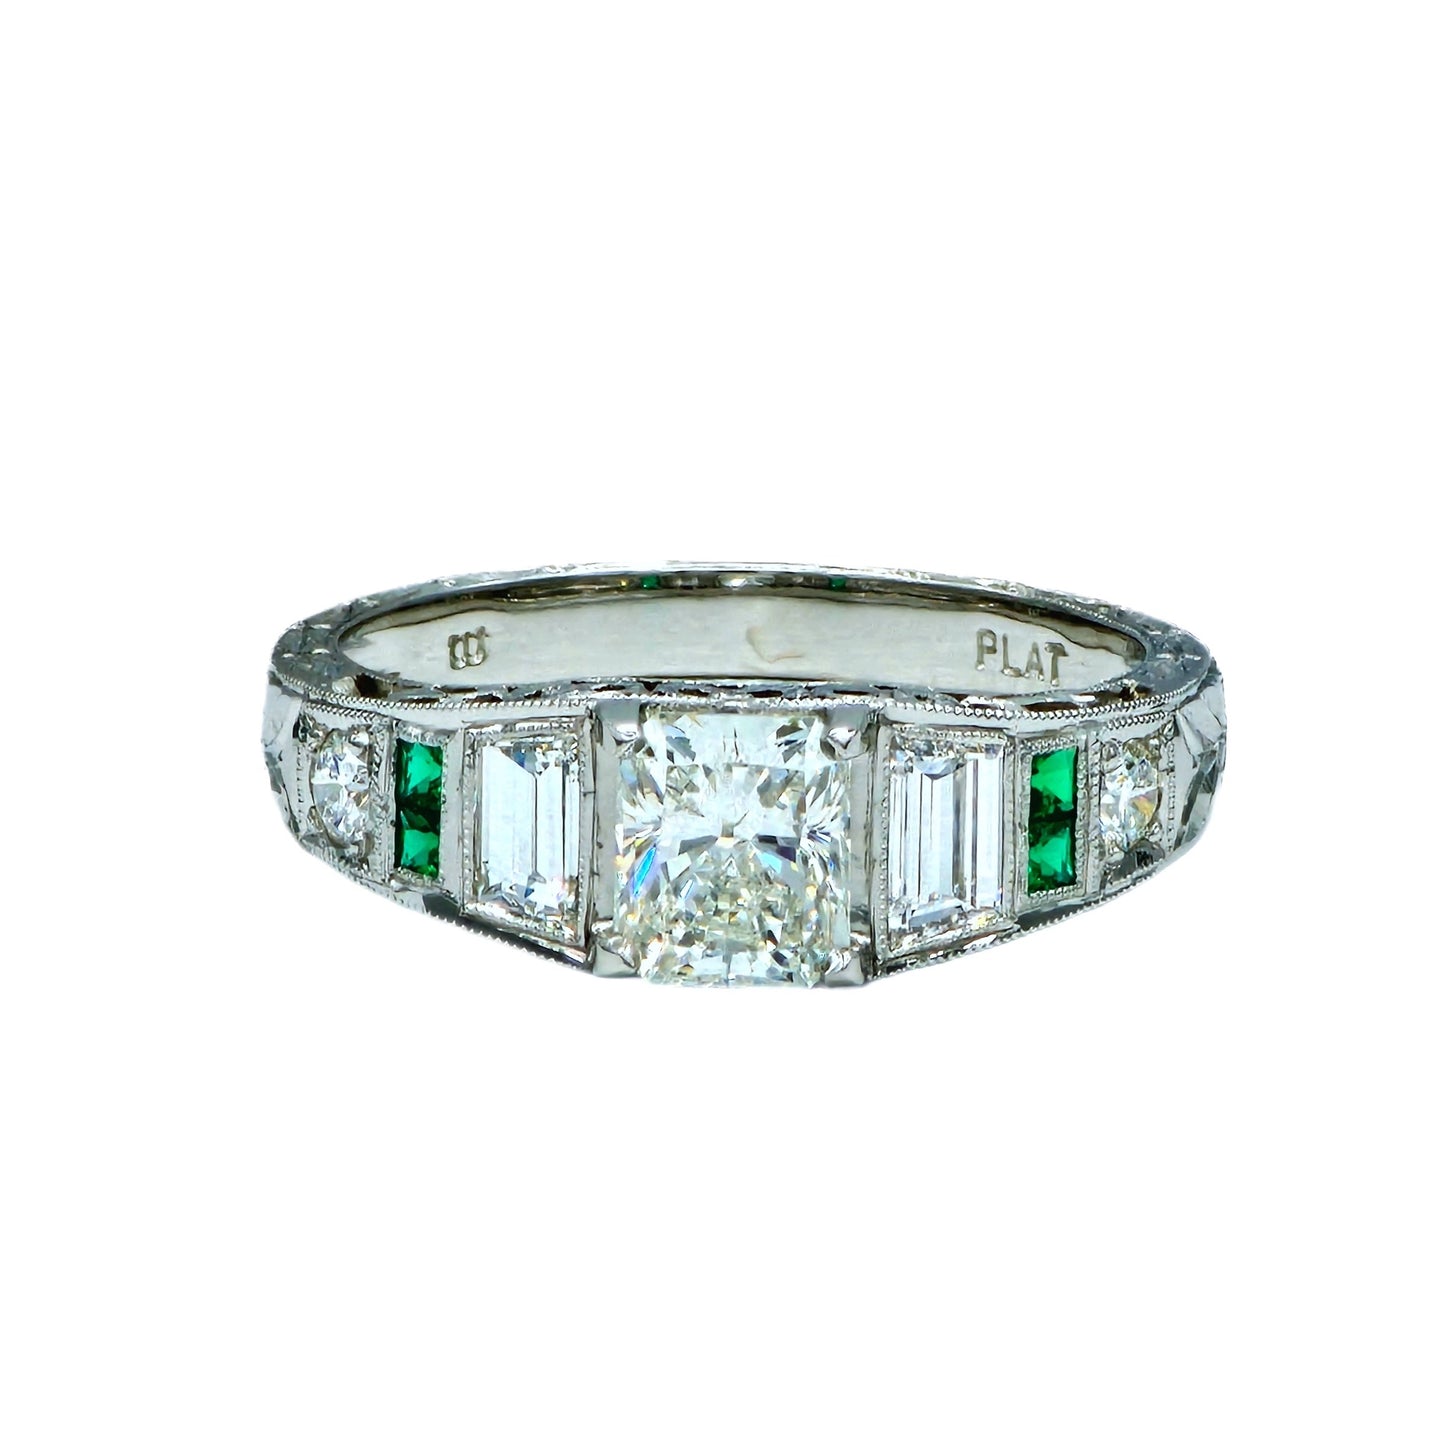 1.02 Carat I/SI1 Radiant Cut Diamond Hand Engraved Ring in Platinum by Whitehouse Brothers, GIA Report